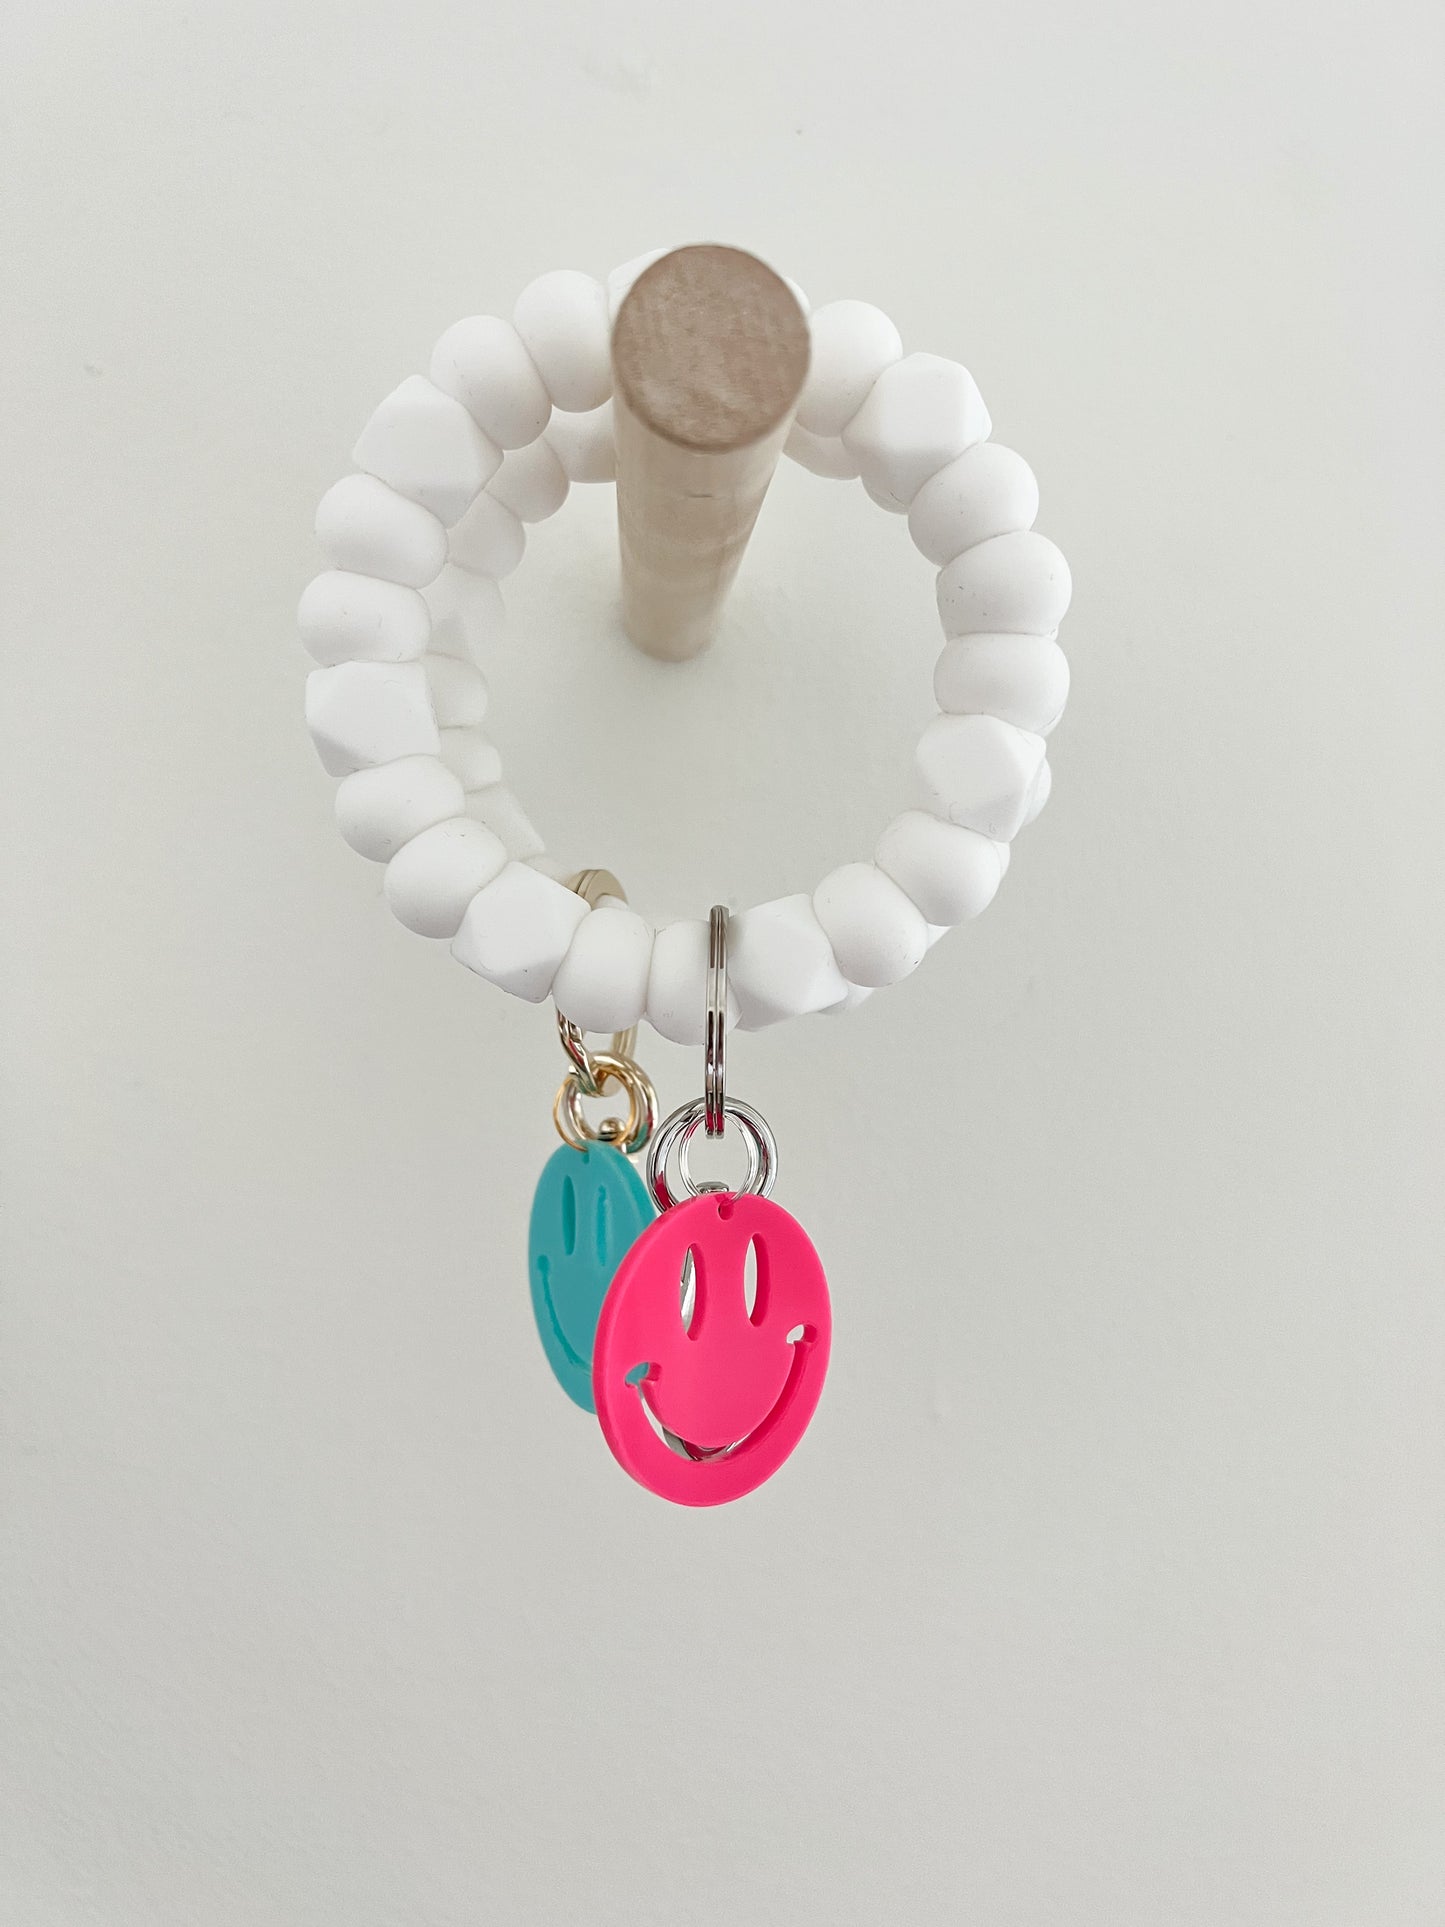 all white bracelet keychain with neon smiley